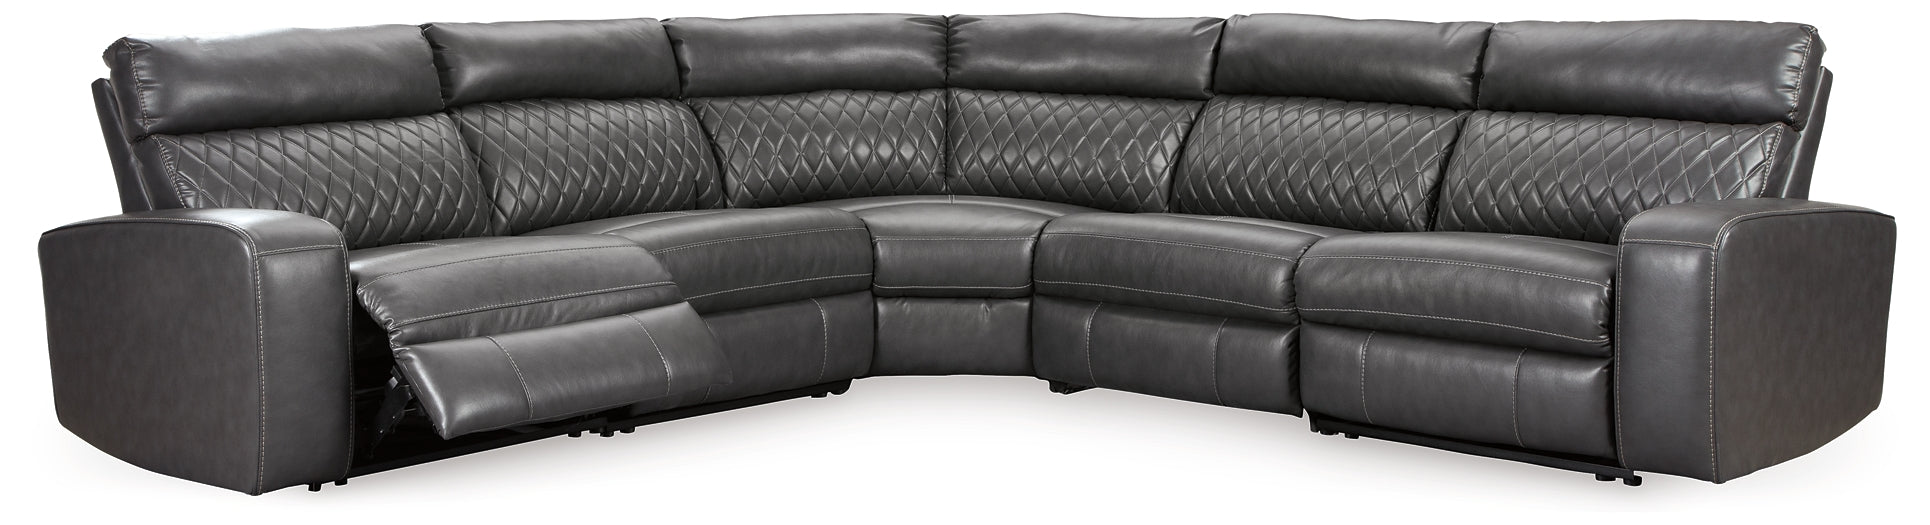 Samperstone 5-Piece Power Reclining Sectional Rent Wise Rent To Own Jacksonville, Florida